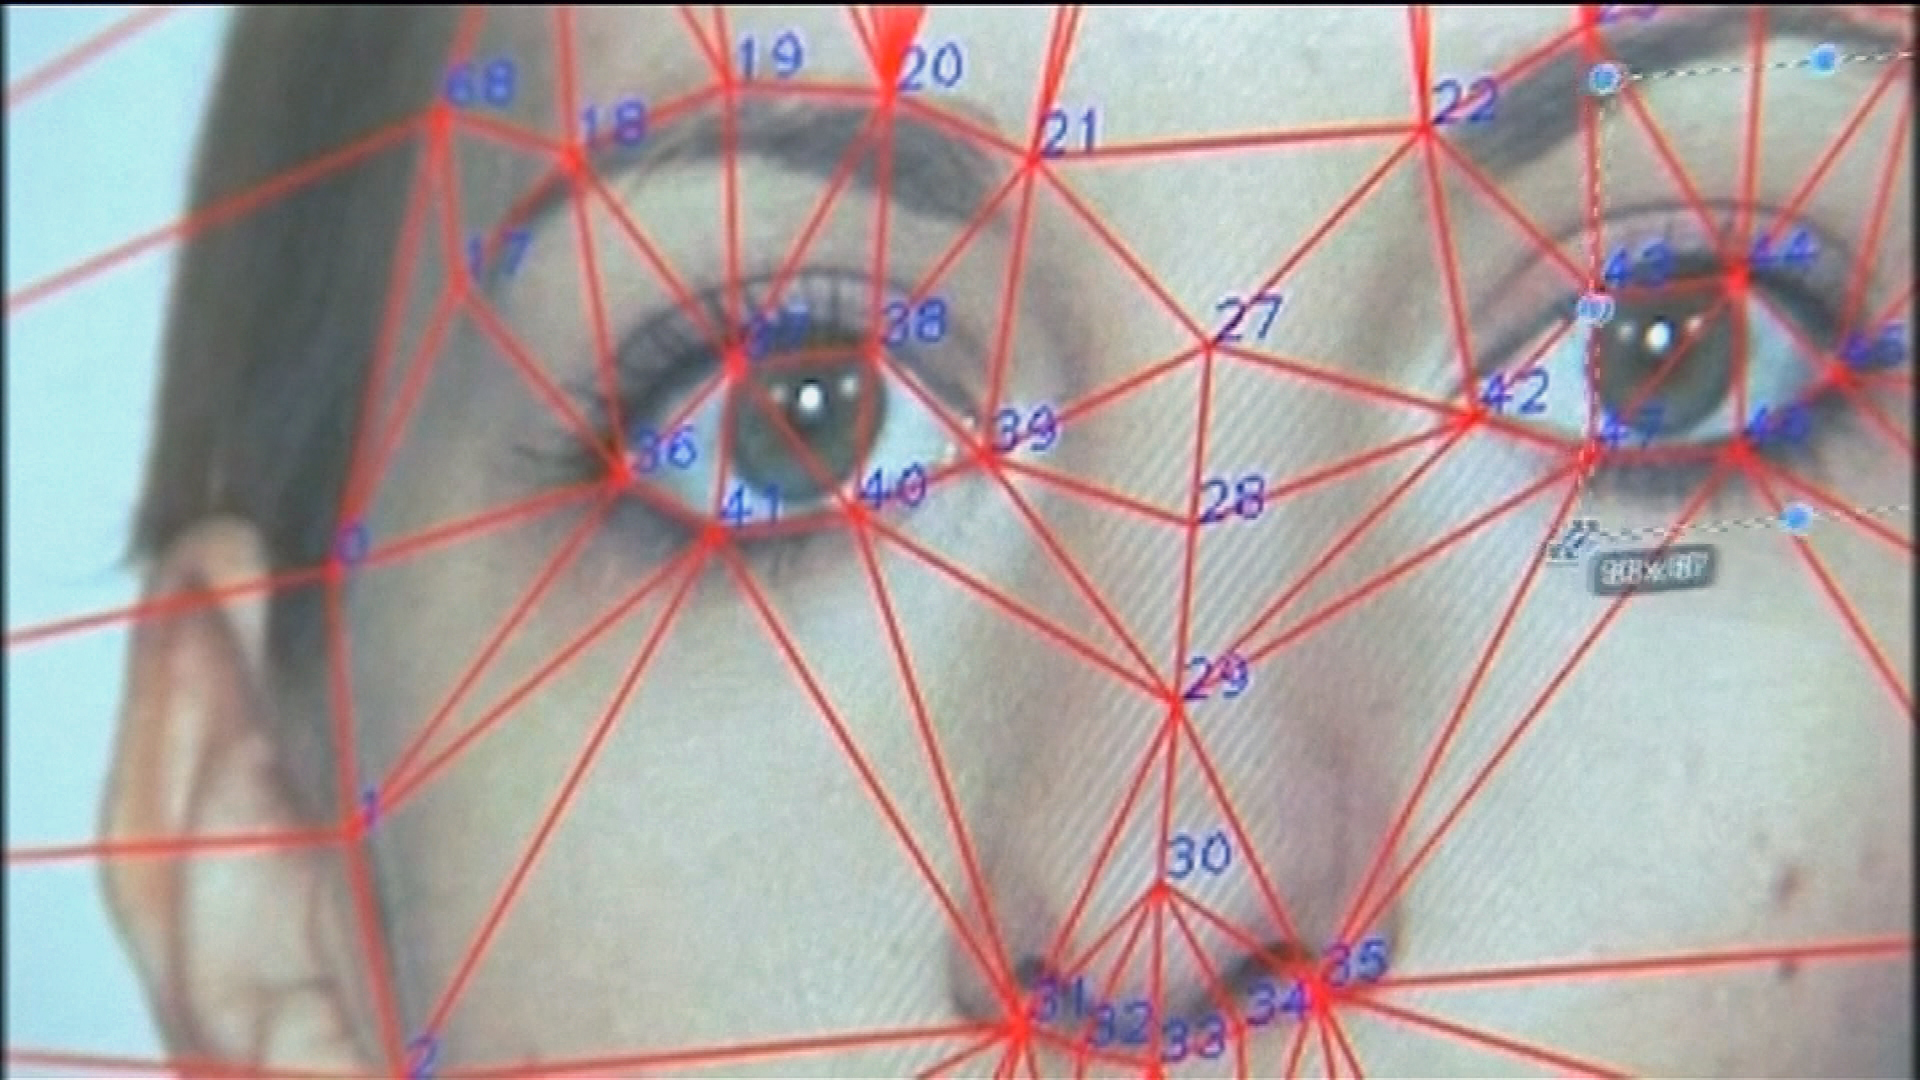 The US media warned the Finnish police about the controversial facial recognition application